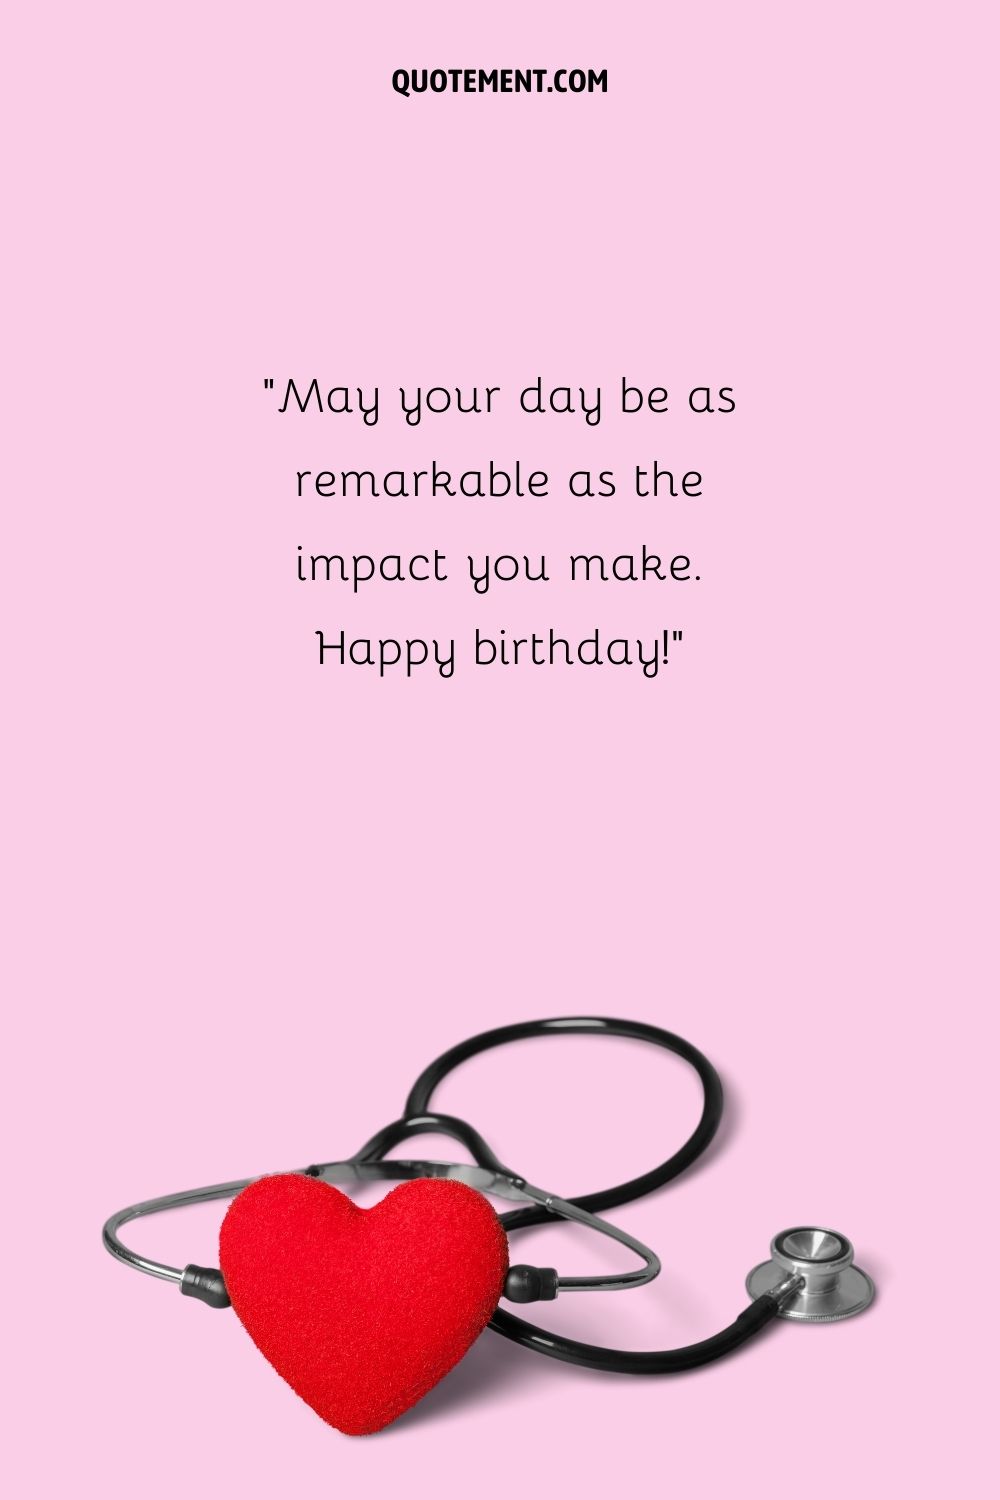 heart and a stethoscope representing birthday wishes doctor